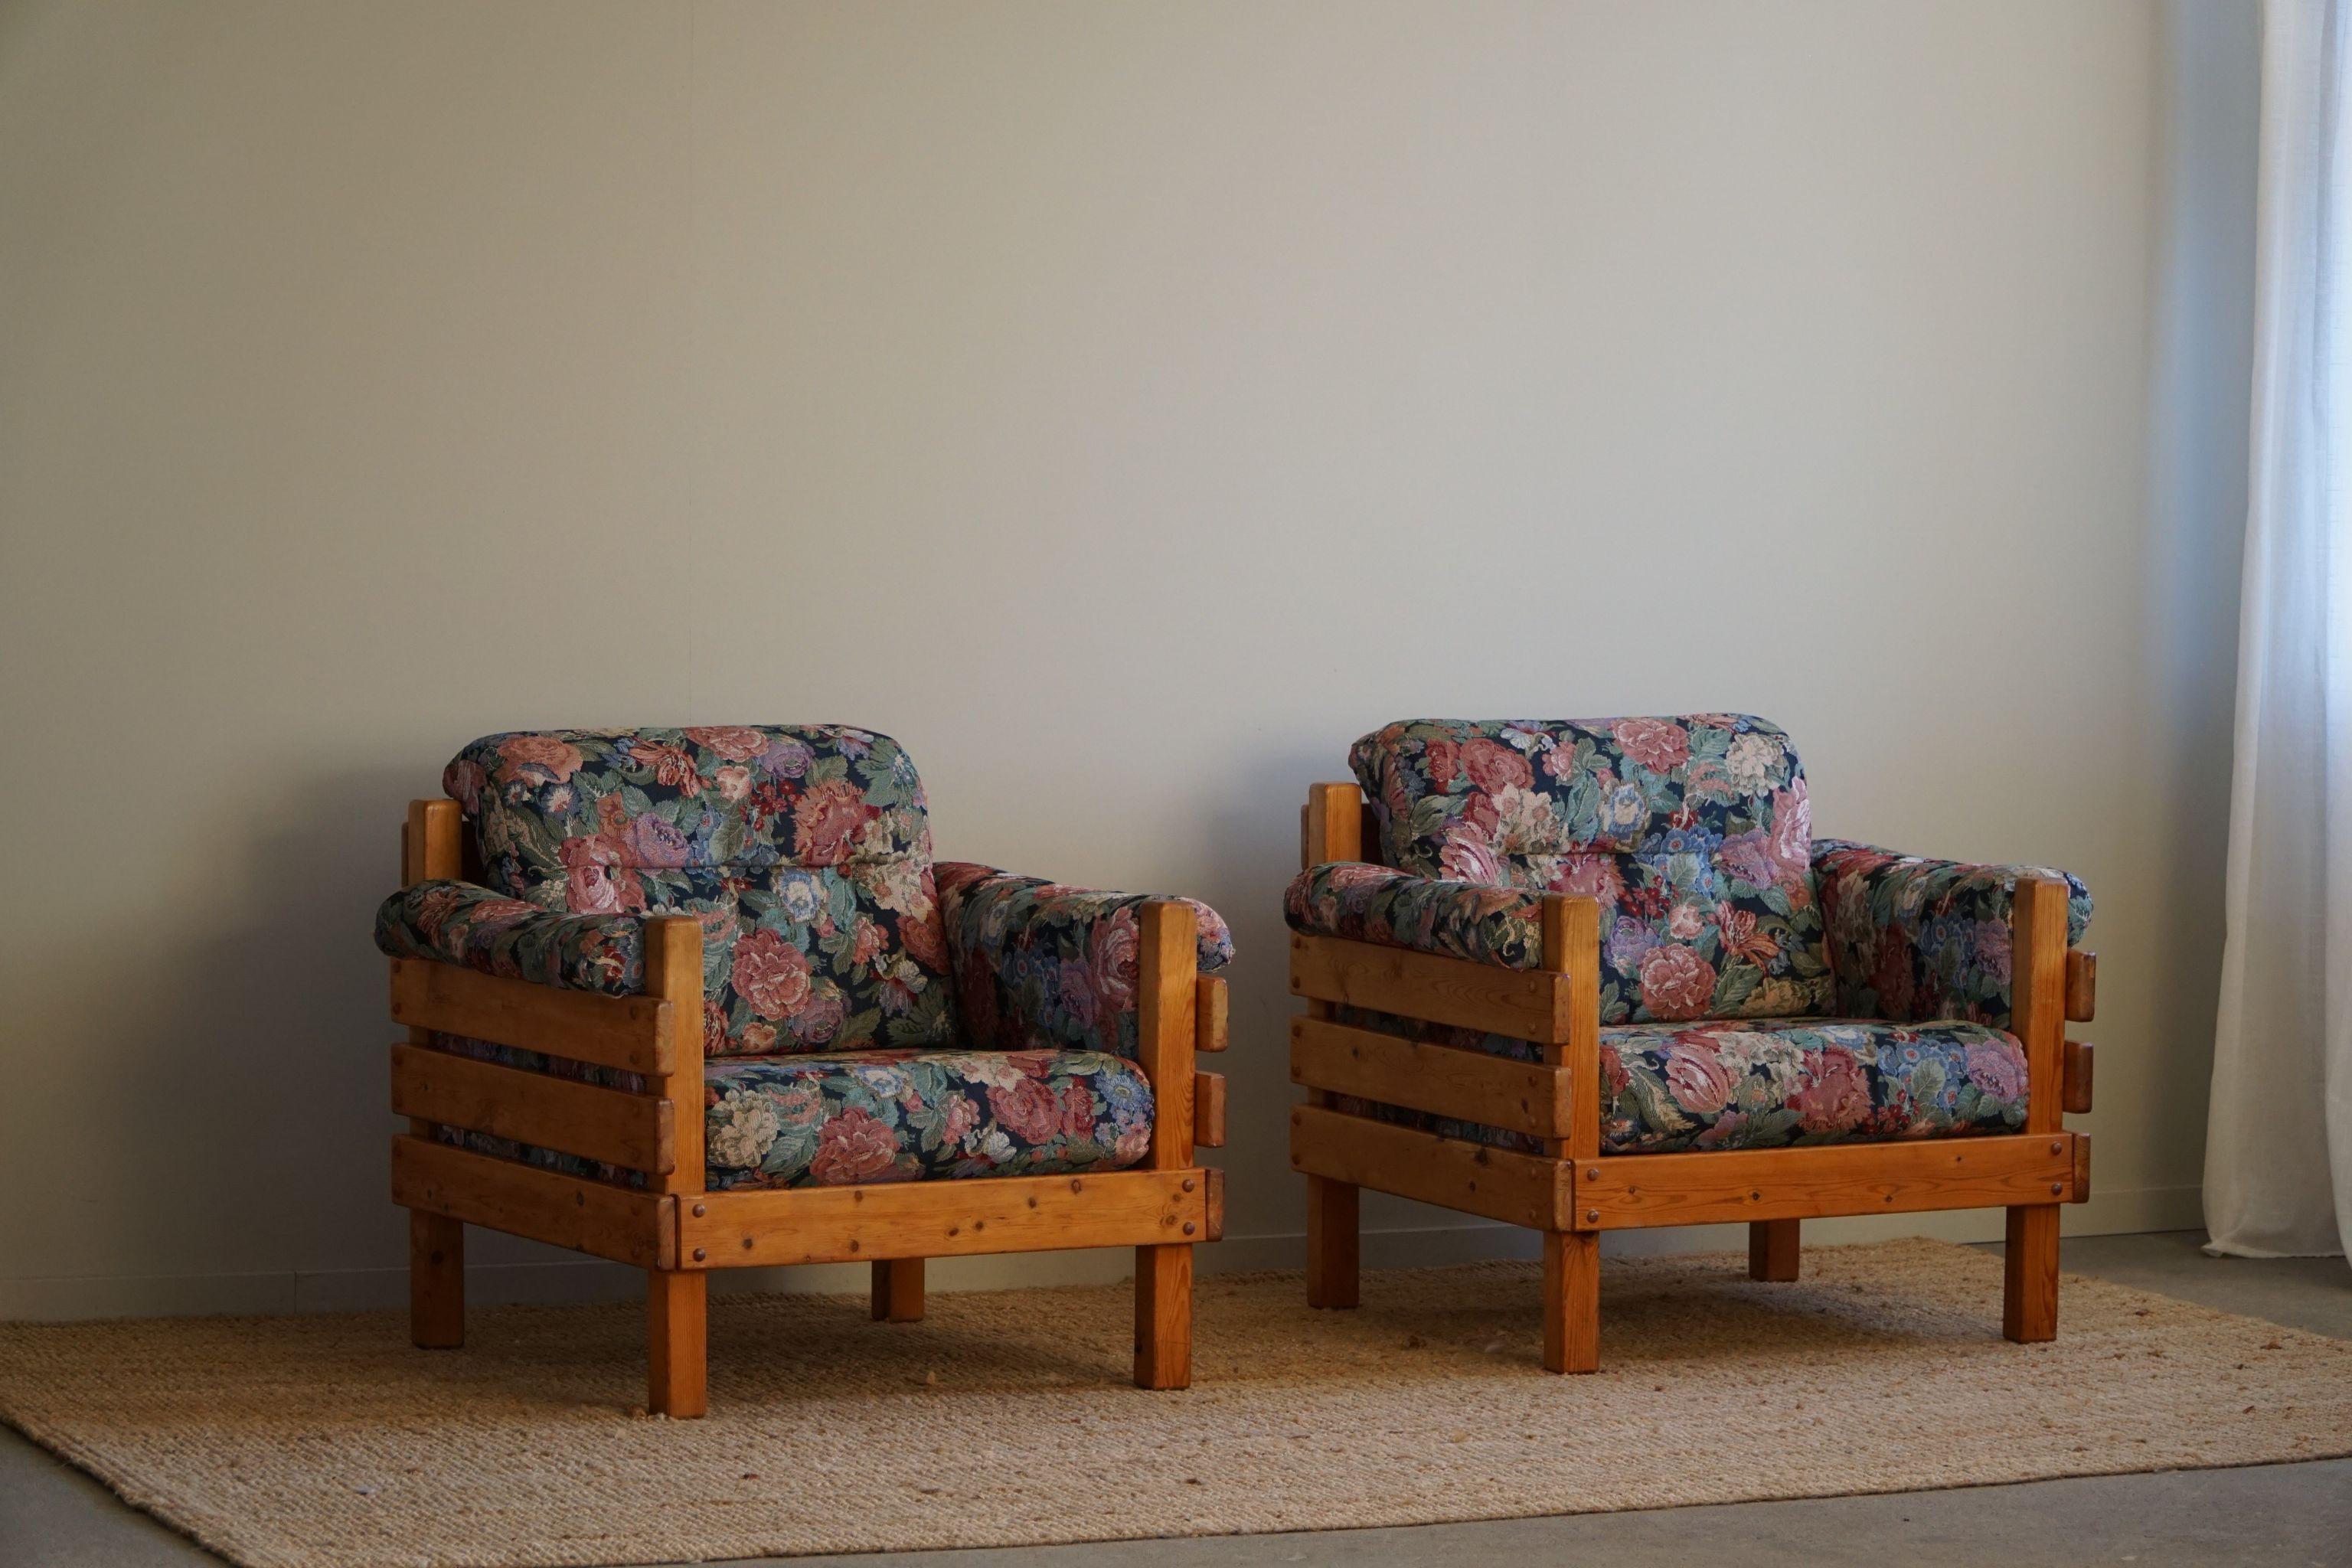 Pair of Brutalist Lounge Chairs in Solid Pine, Swedish Modern, Made in 1970s For Sale 5